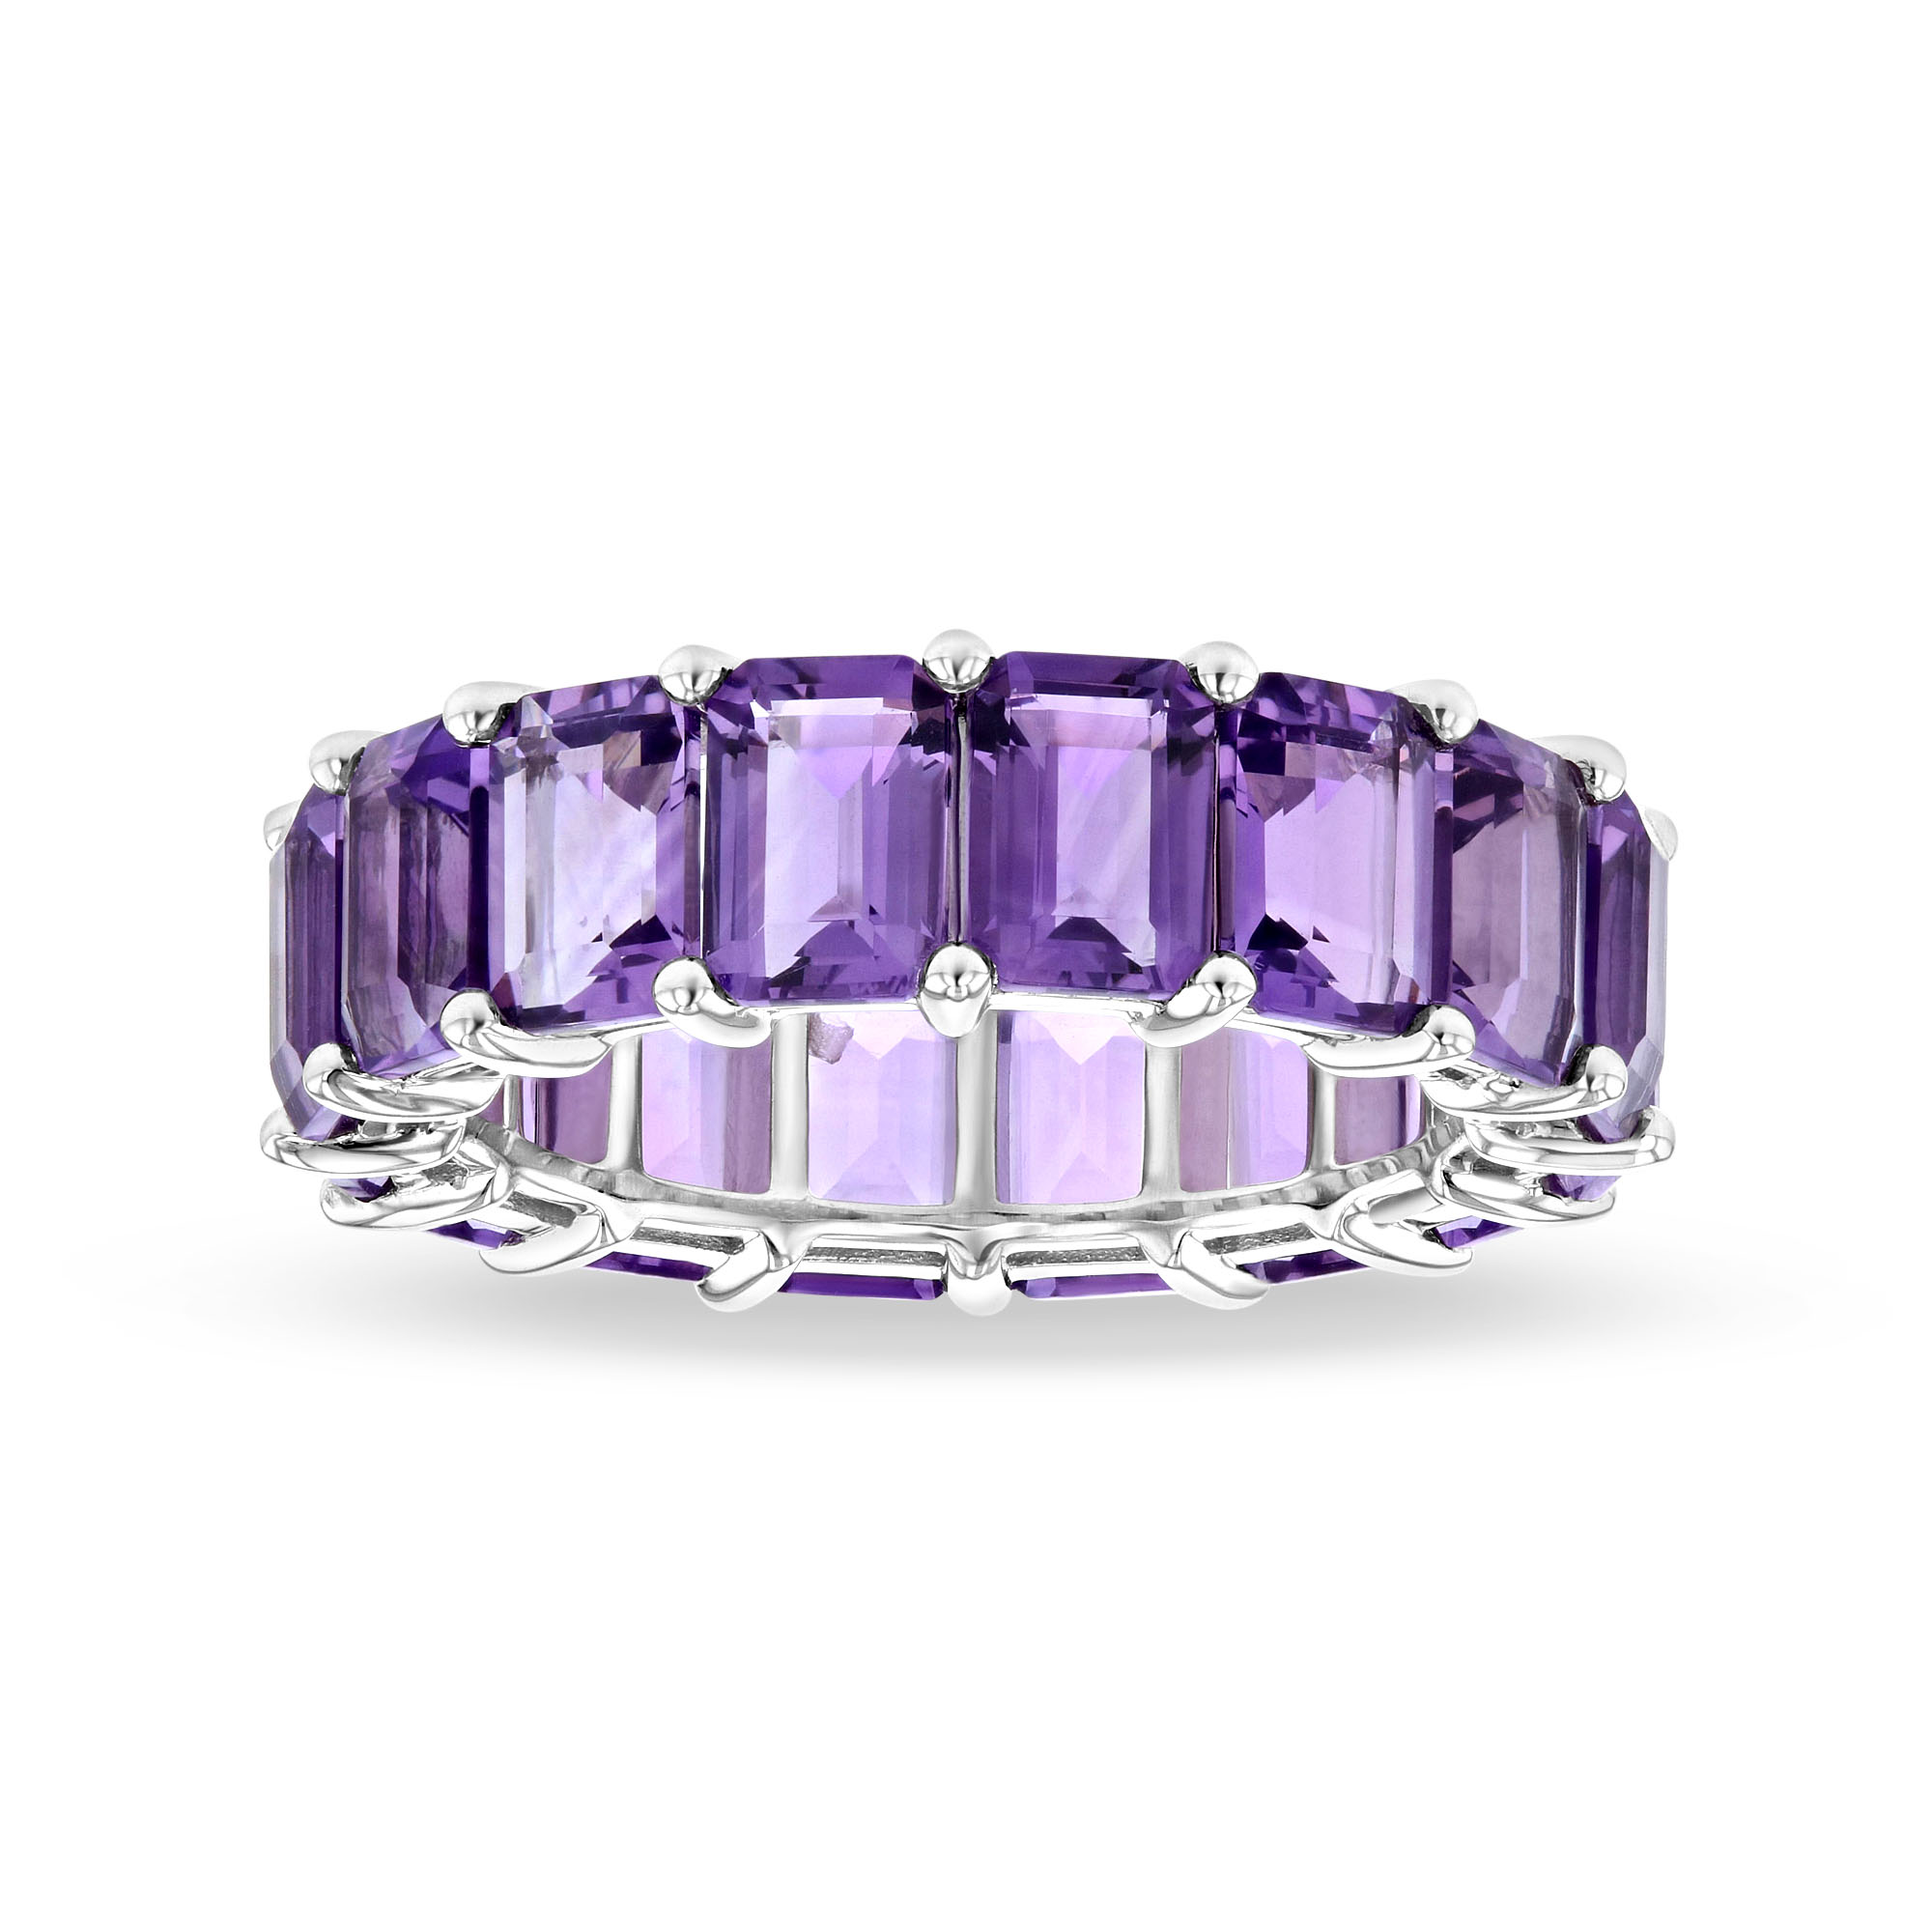 View 8.55ctw Amethyst Emerald Cut Eternity Ring in 14k White Gold